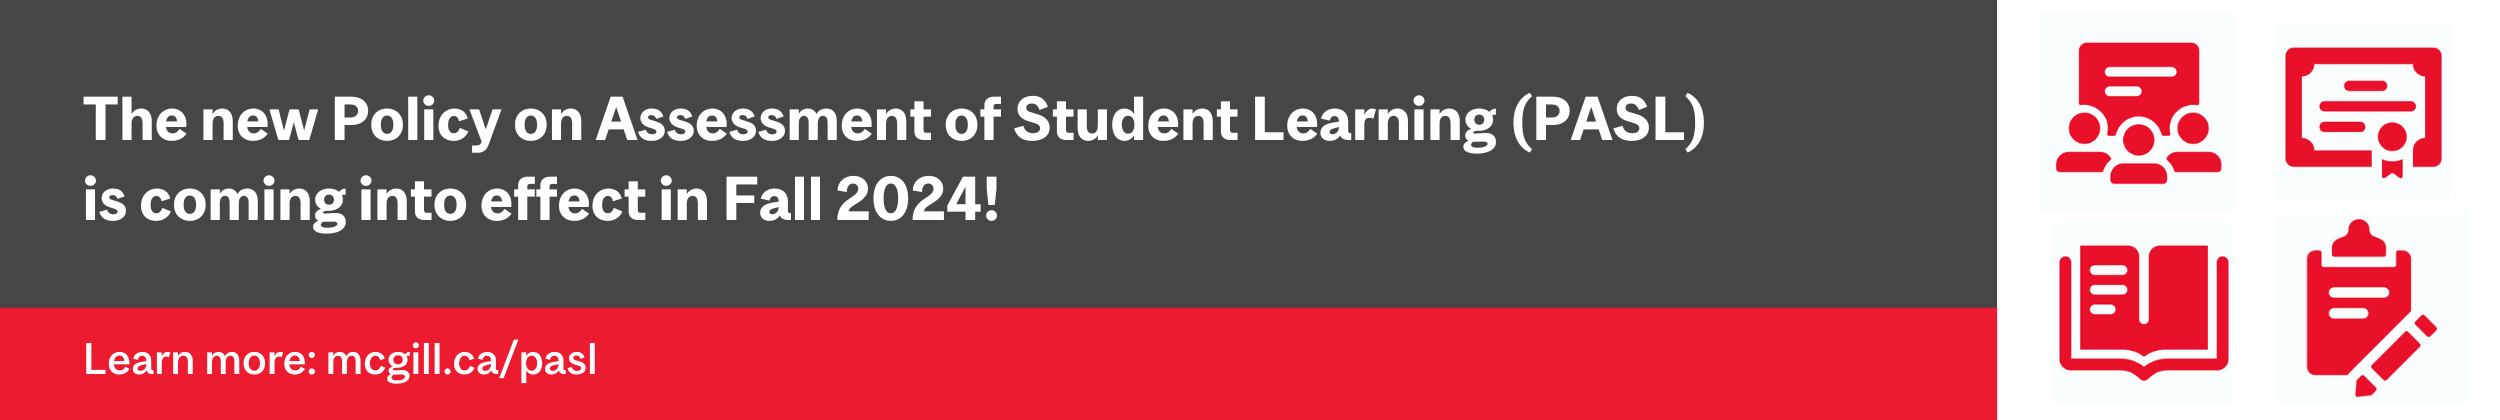 The new Policy on Assessment of Student Learning (PASL) is coming into effect in Fall 2024!